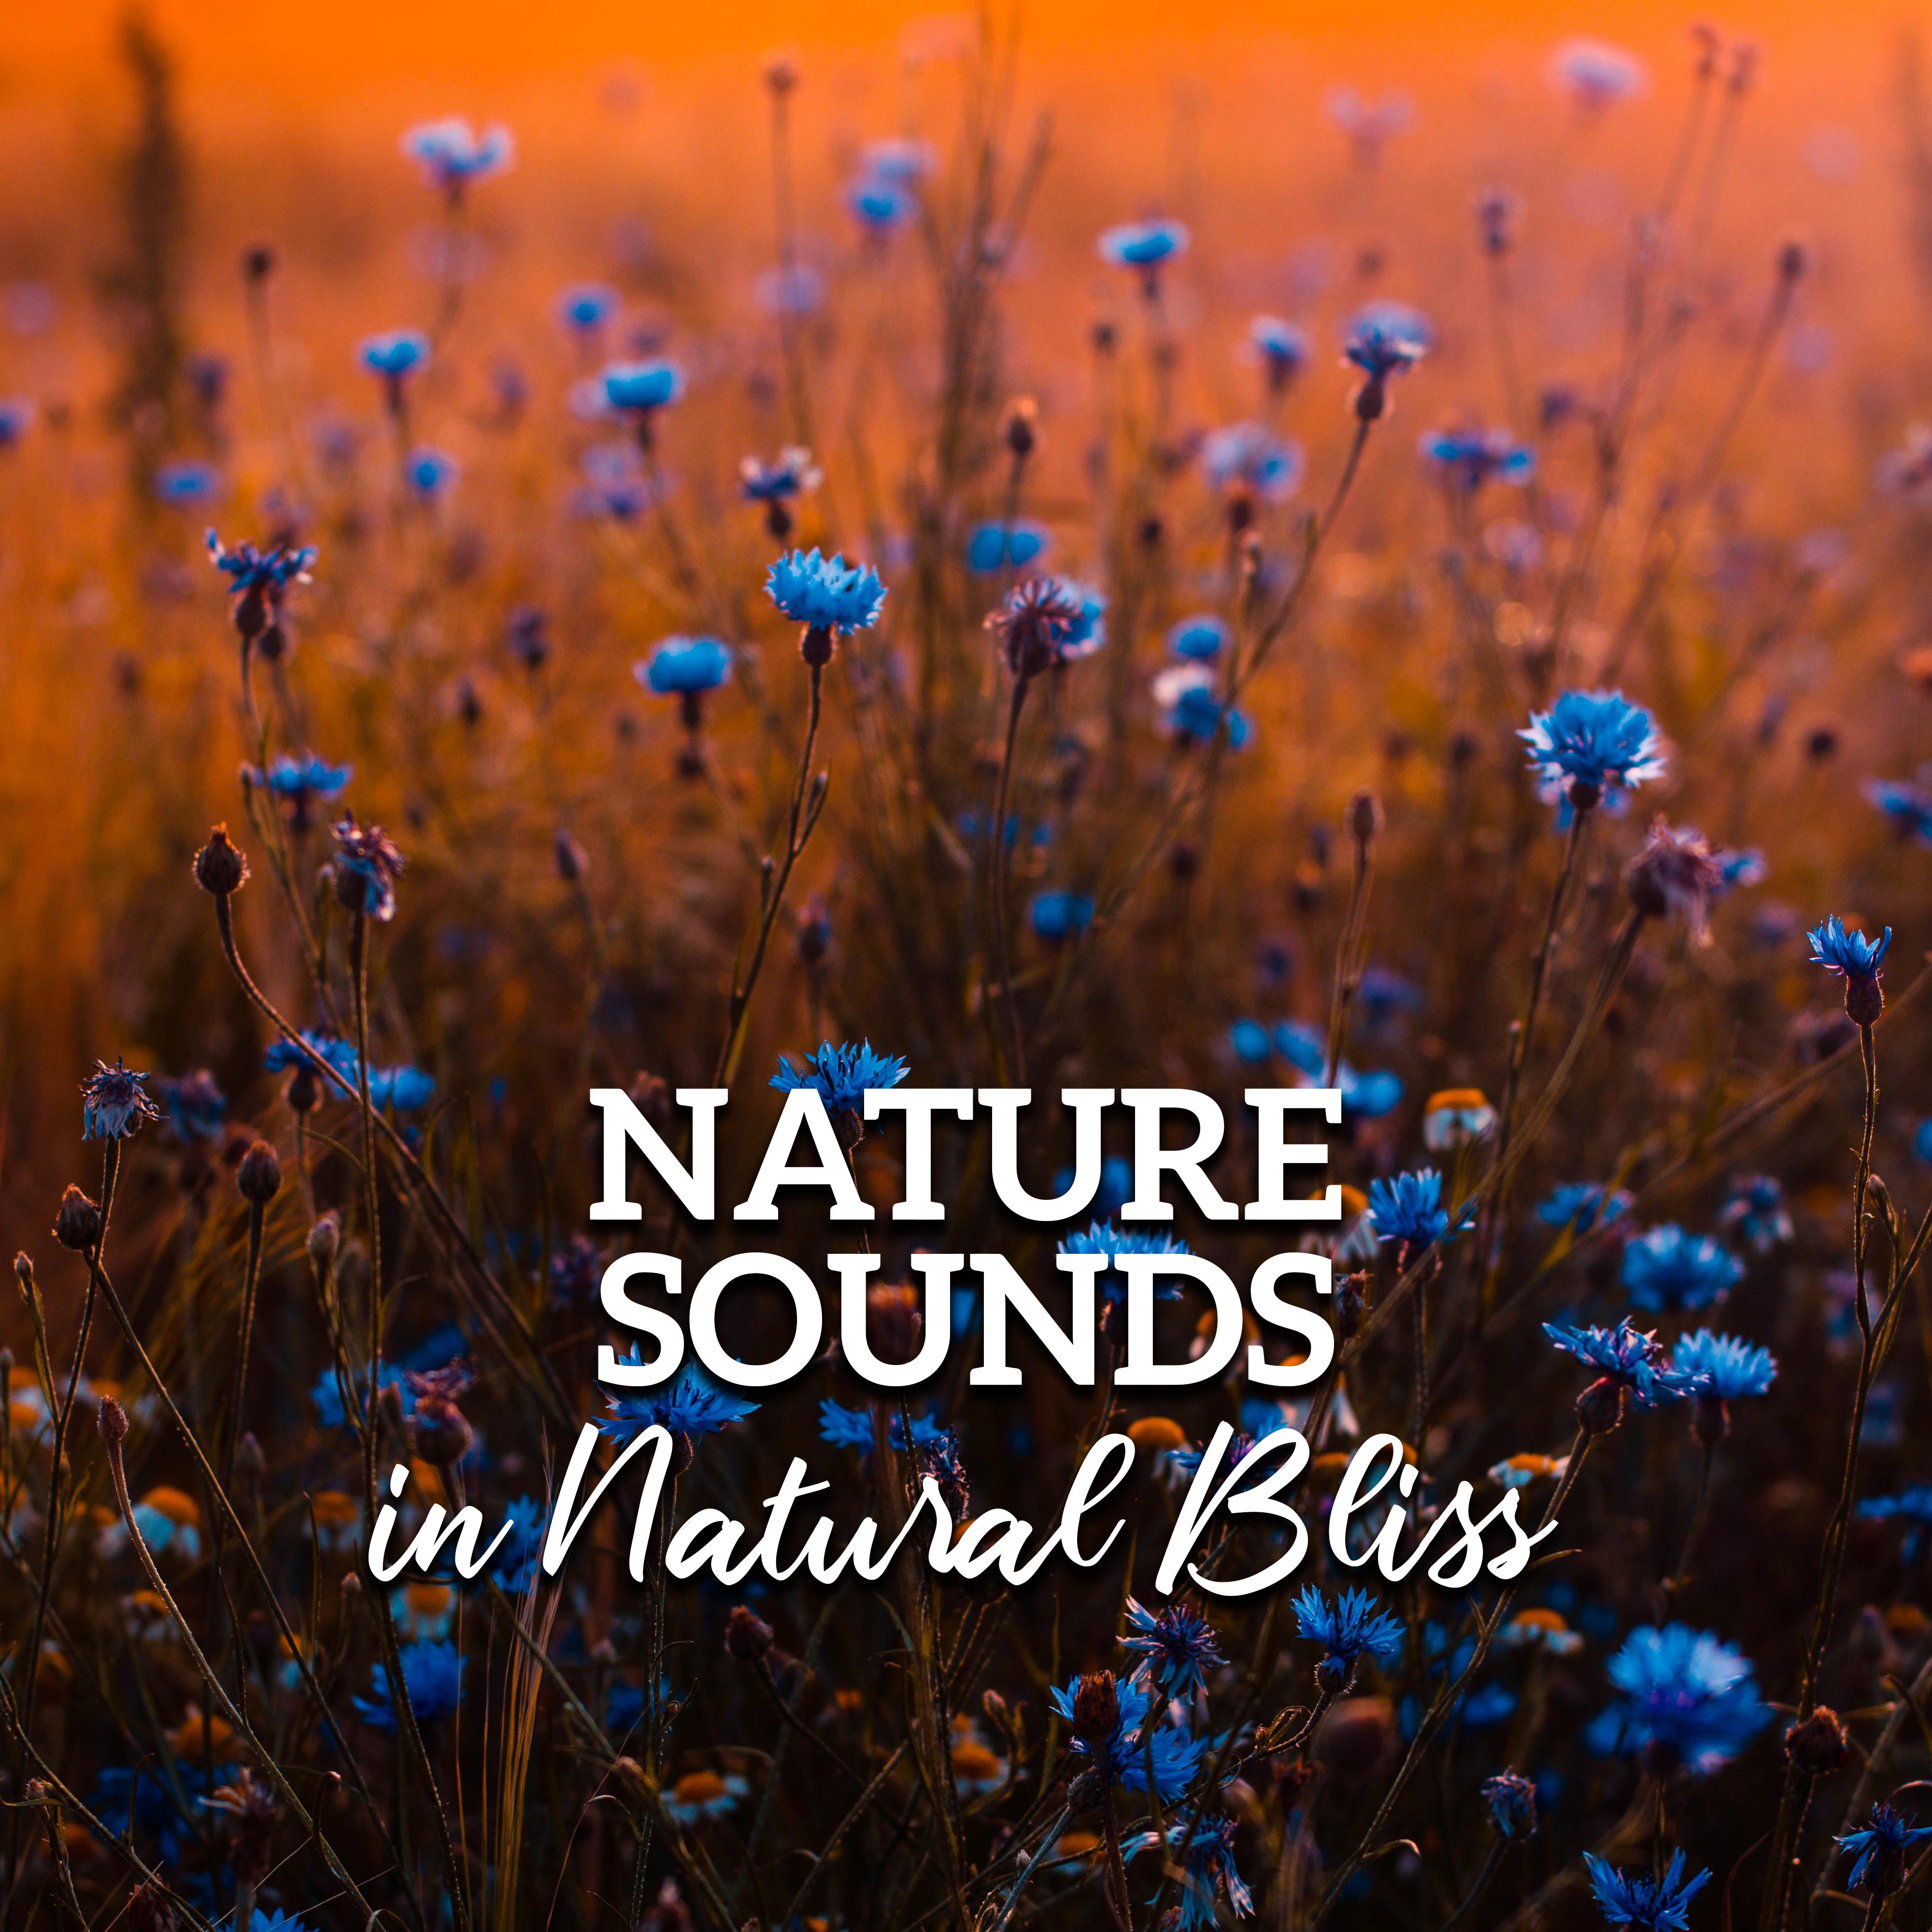 Nature Sounds in Natural Bliss – Pure Relaxation, Reduce Stress, 15 Sounds of Nature, Healing Therapy, Zen Serenity, Lounge Music